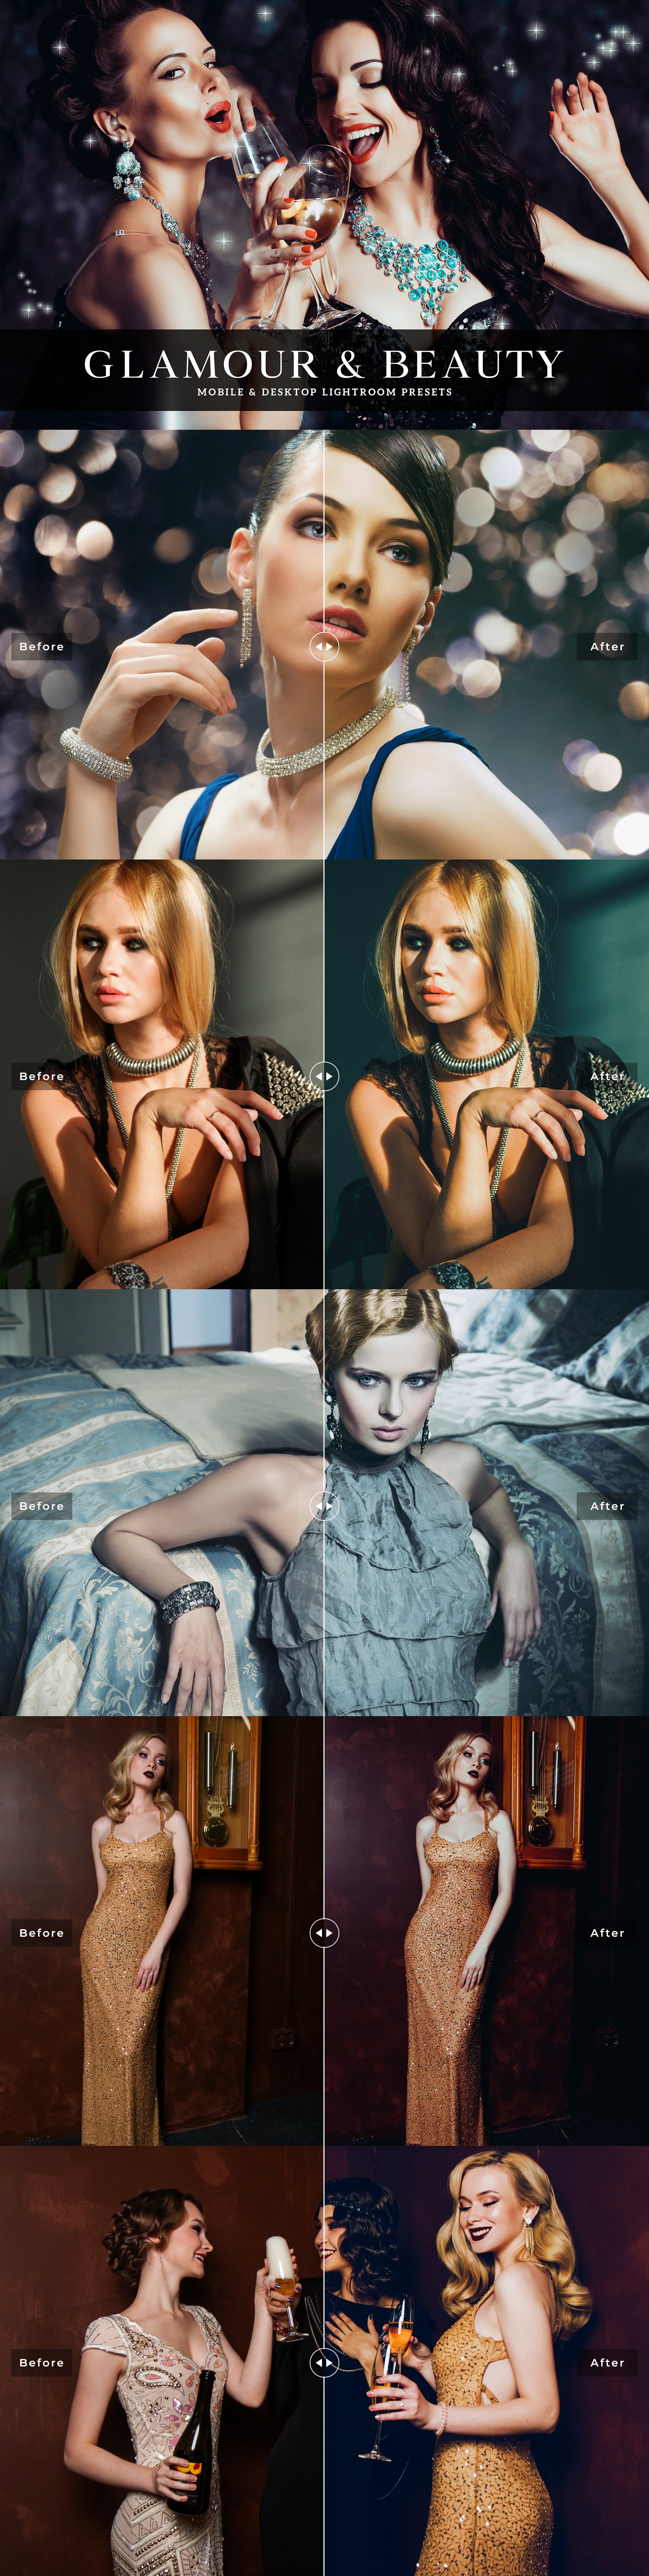 Glamour & Beauty Lightroom Presetscover image.